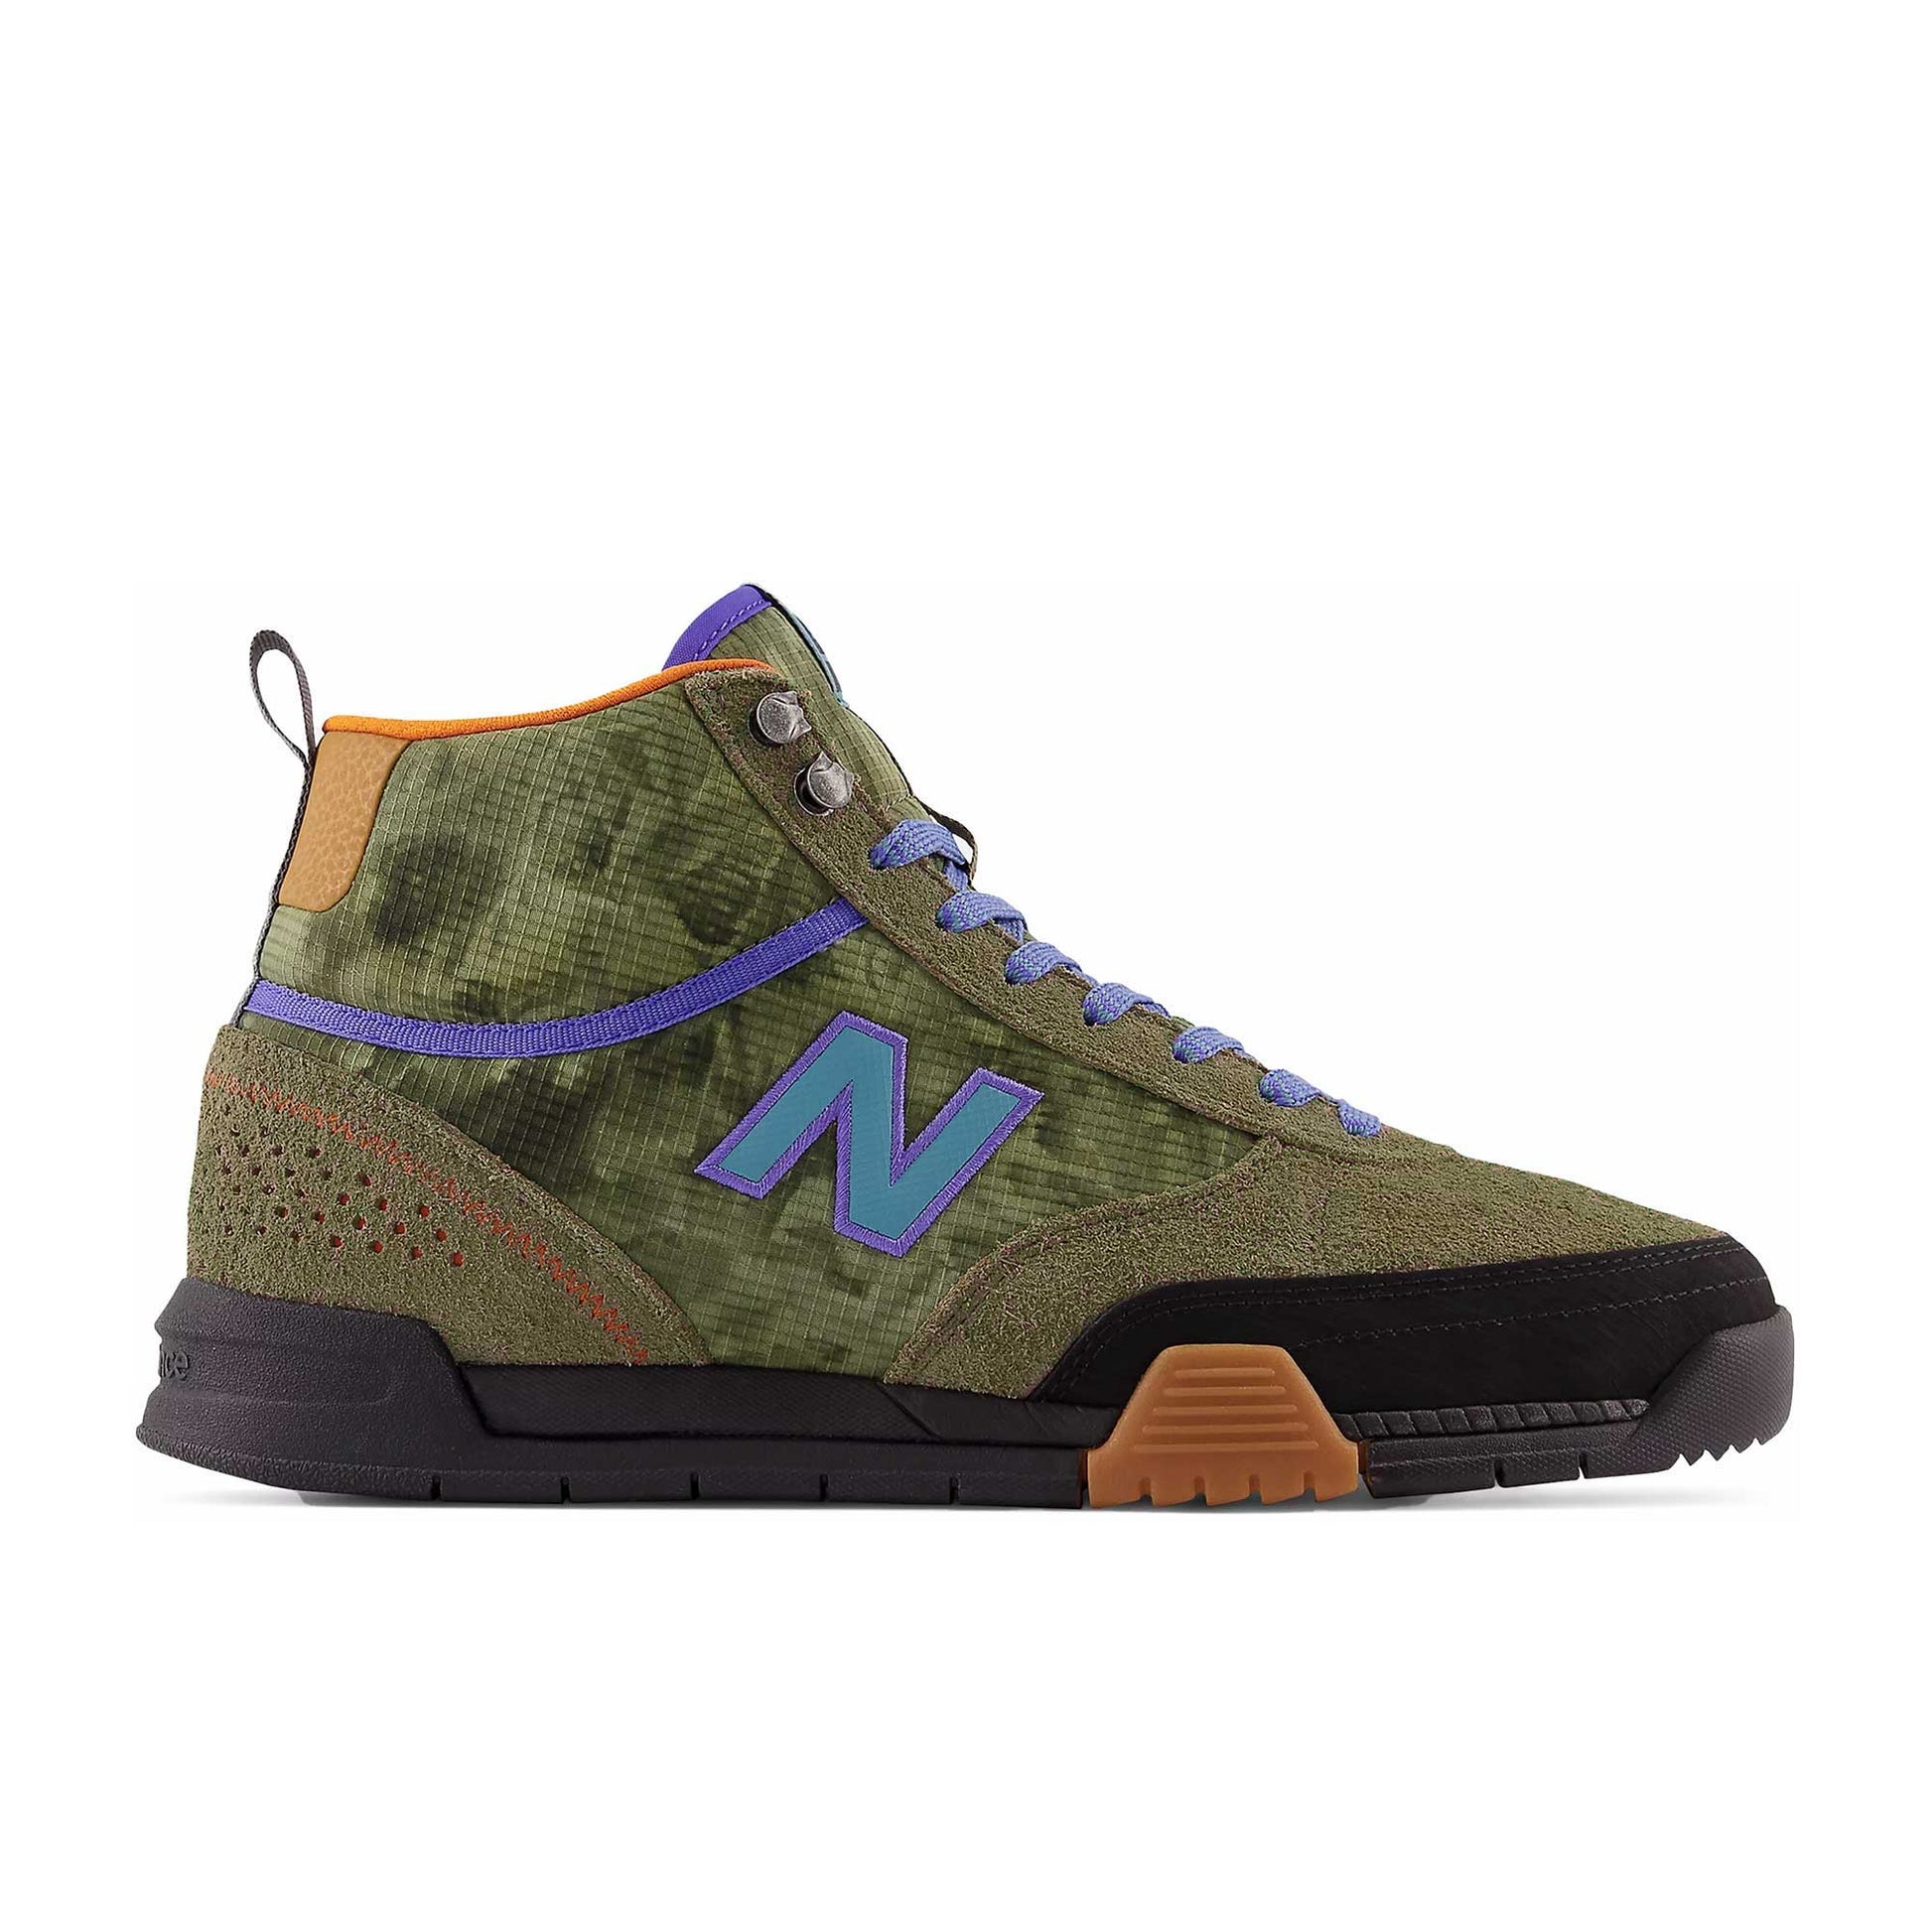 New Balance Numeric 440 Trail, olive with blue - Tiki Room Skateboards - 1